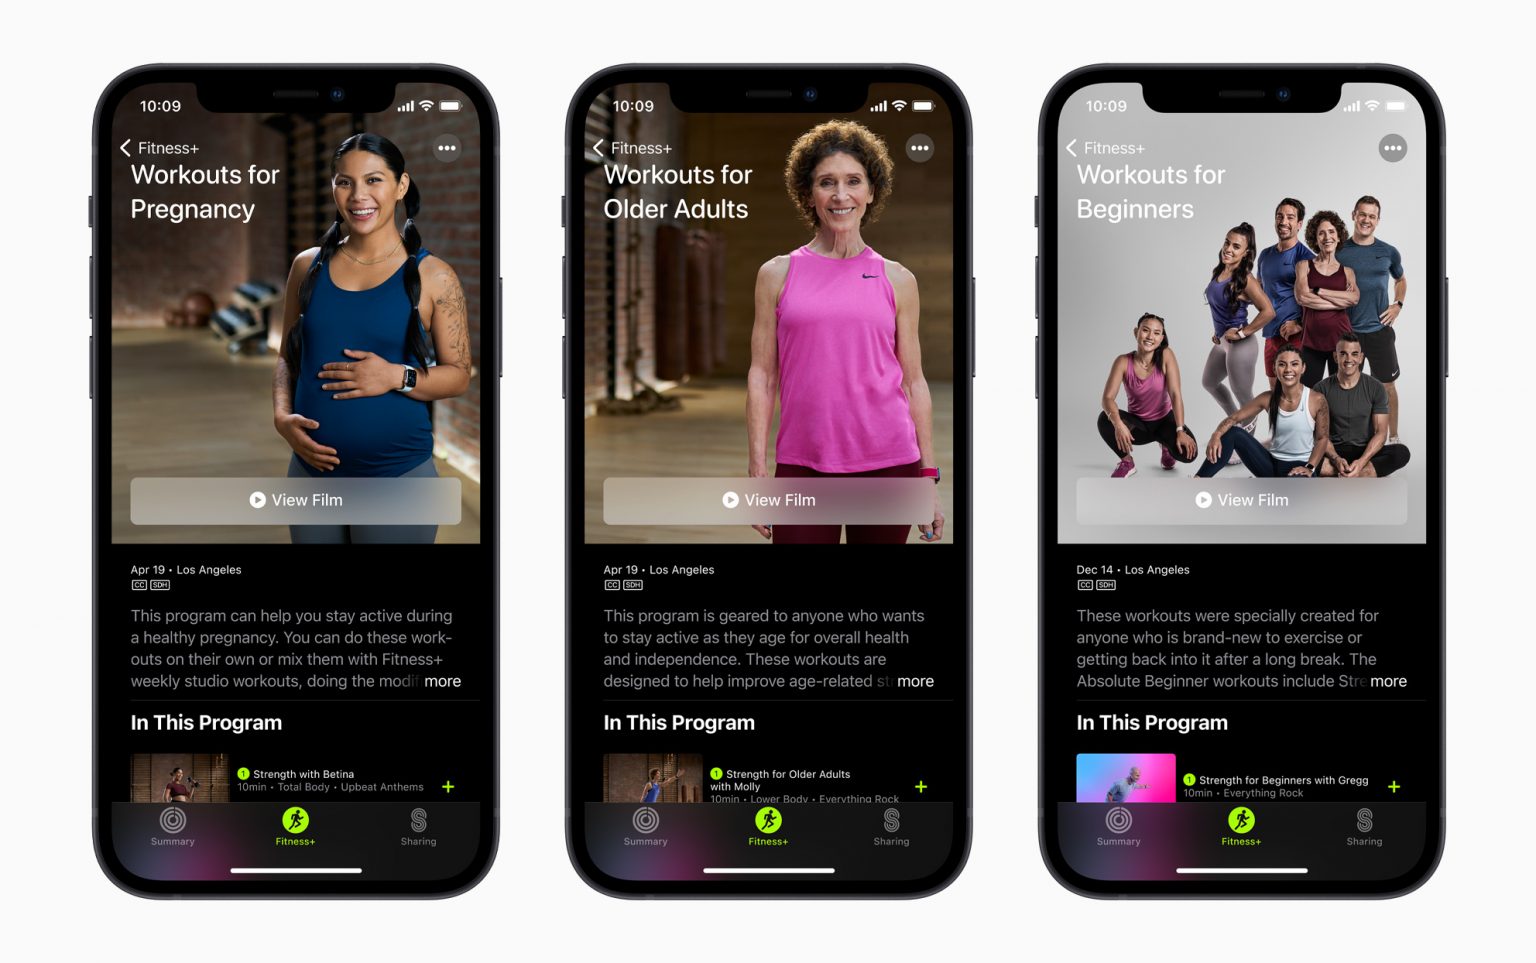 Apple Fitness+ is adding several new workout categories on April 19: Workouts for Pregnancy, Workouts for Older Adults, and Workouts for Beginners.